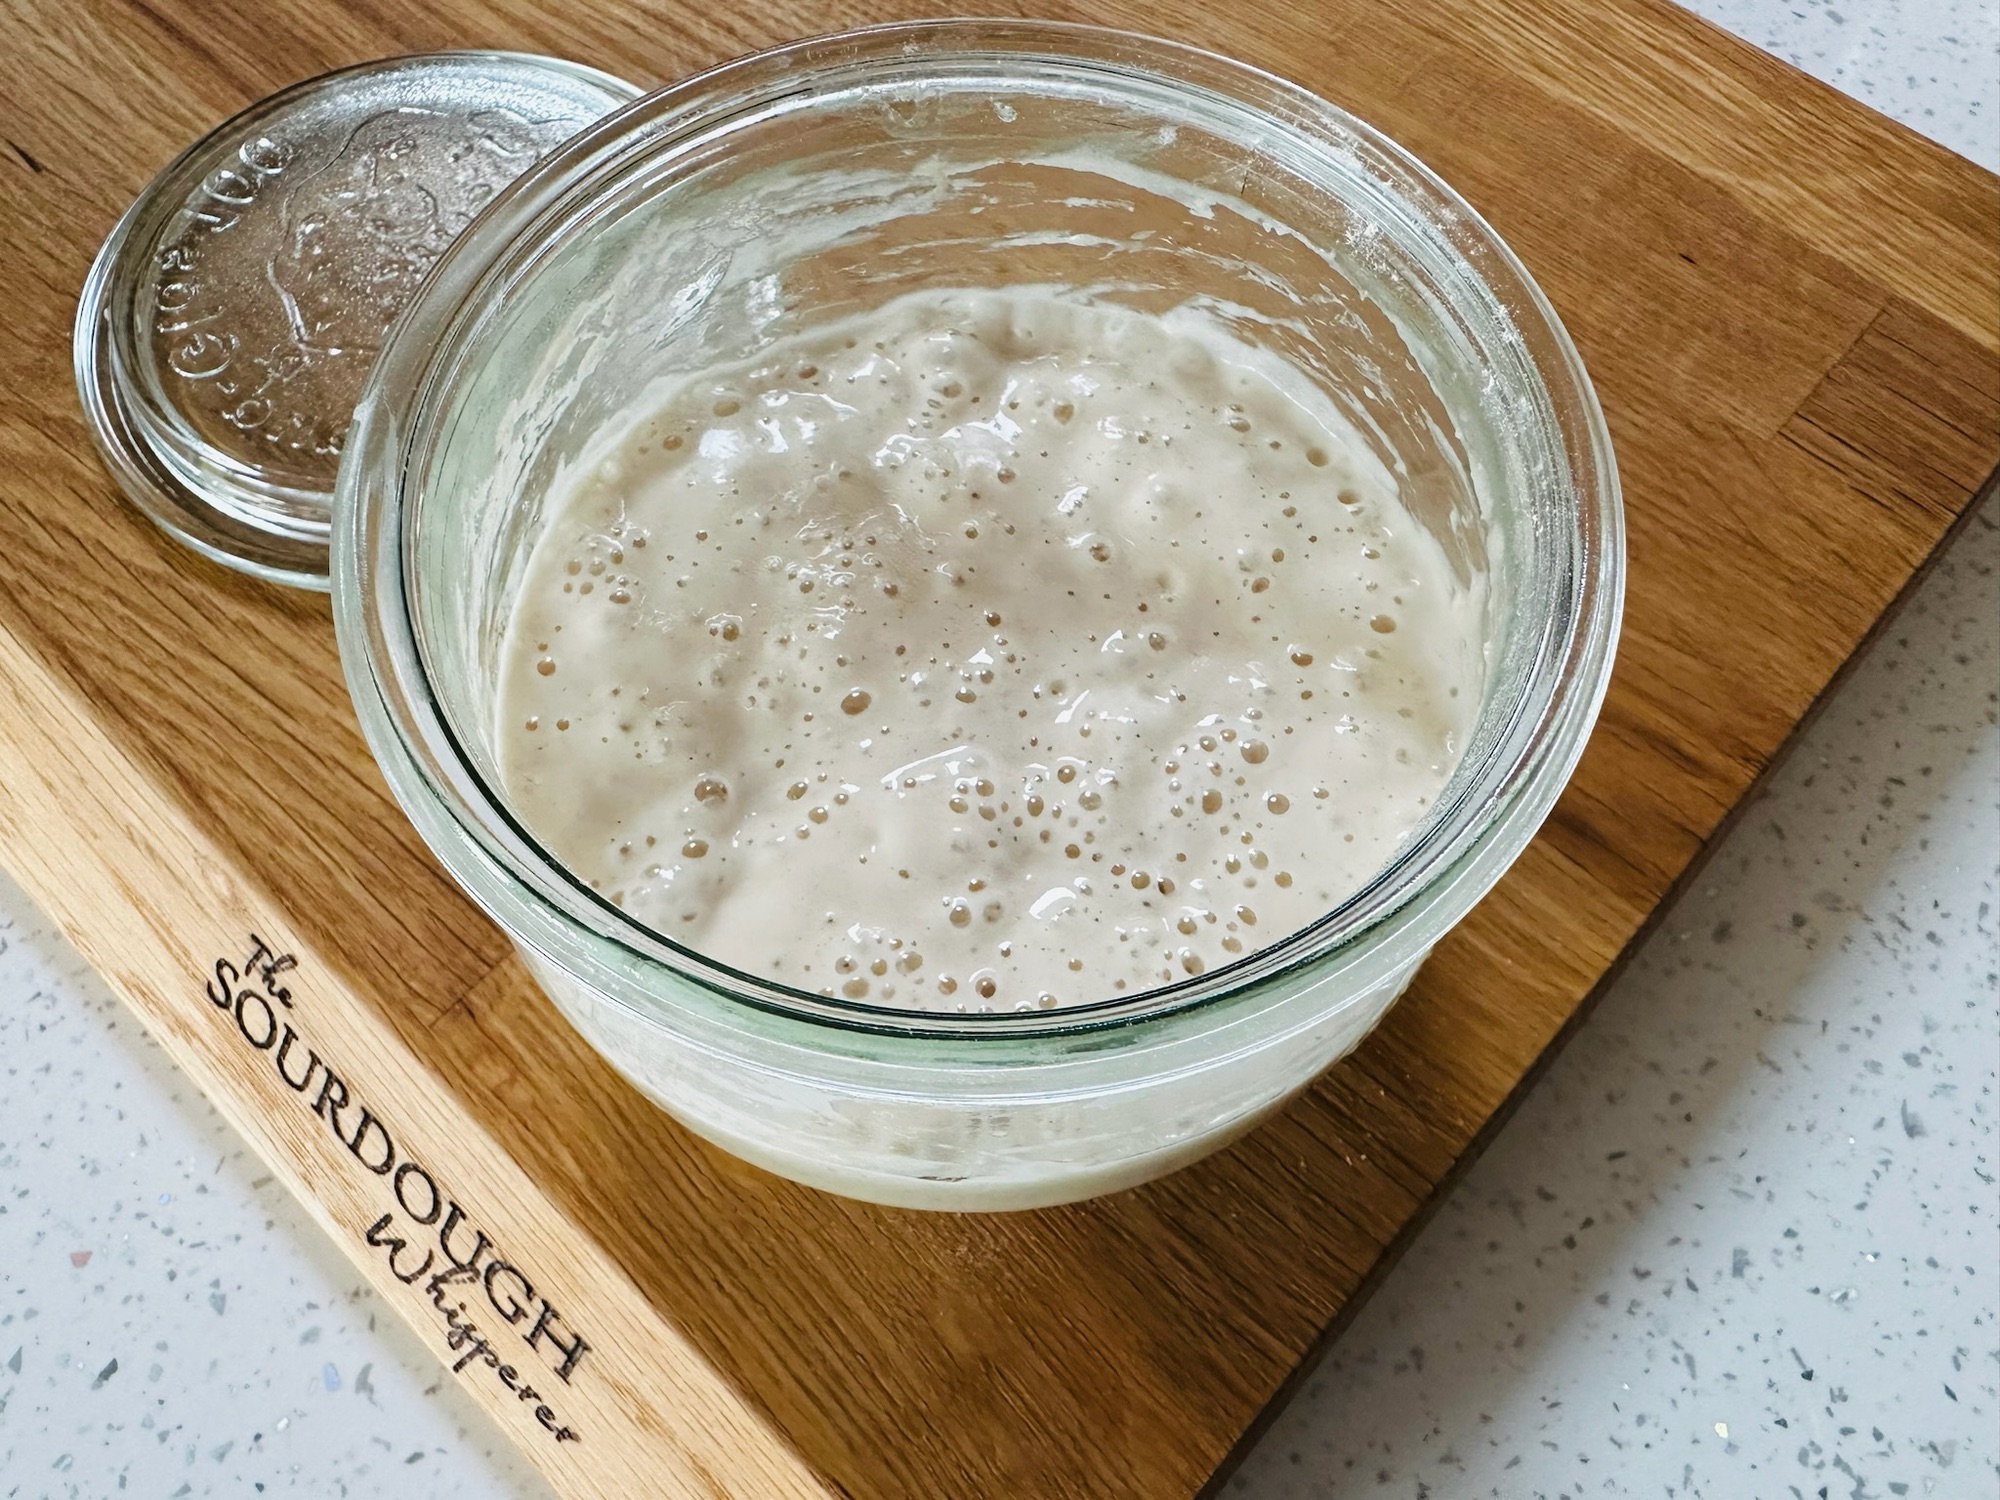 HOW TO MAKE A STARTER – The simplest way to make sourdough